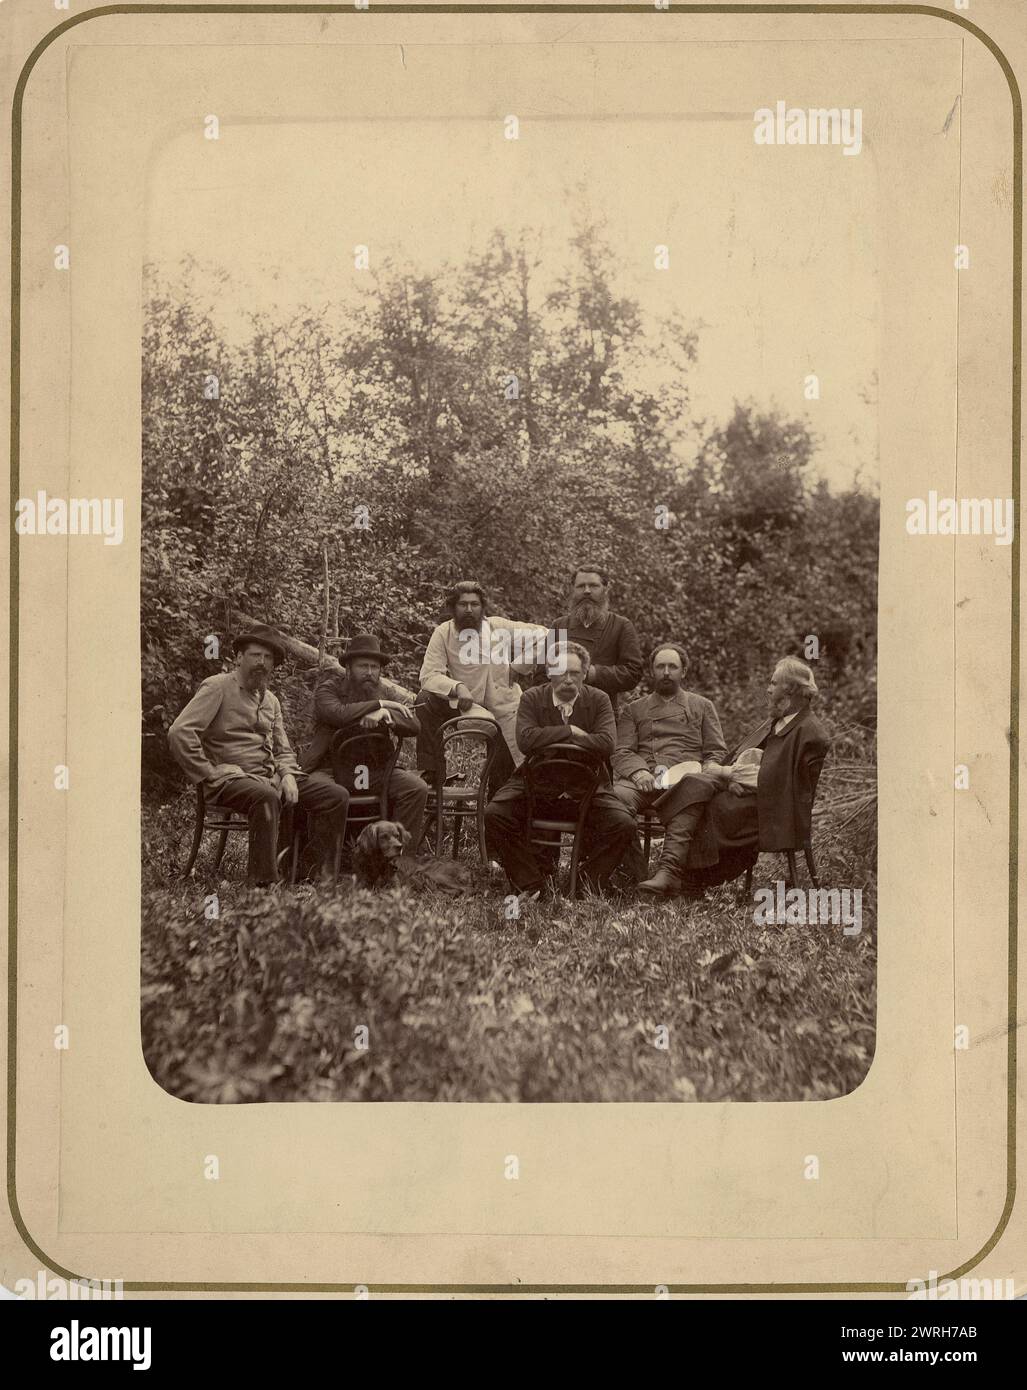 A group of Krasnoyarsk residents hunting in the Minusinsk district, on the Yenisei River, 1888. This collection includes more than four hundred photographs of daily life in Yenisei Province in the late tsarist period. Photographs include peasants, Cossacks, and high-ranking officials. Stock Photo